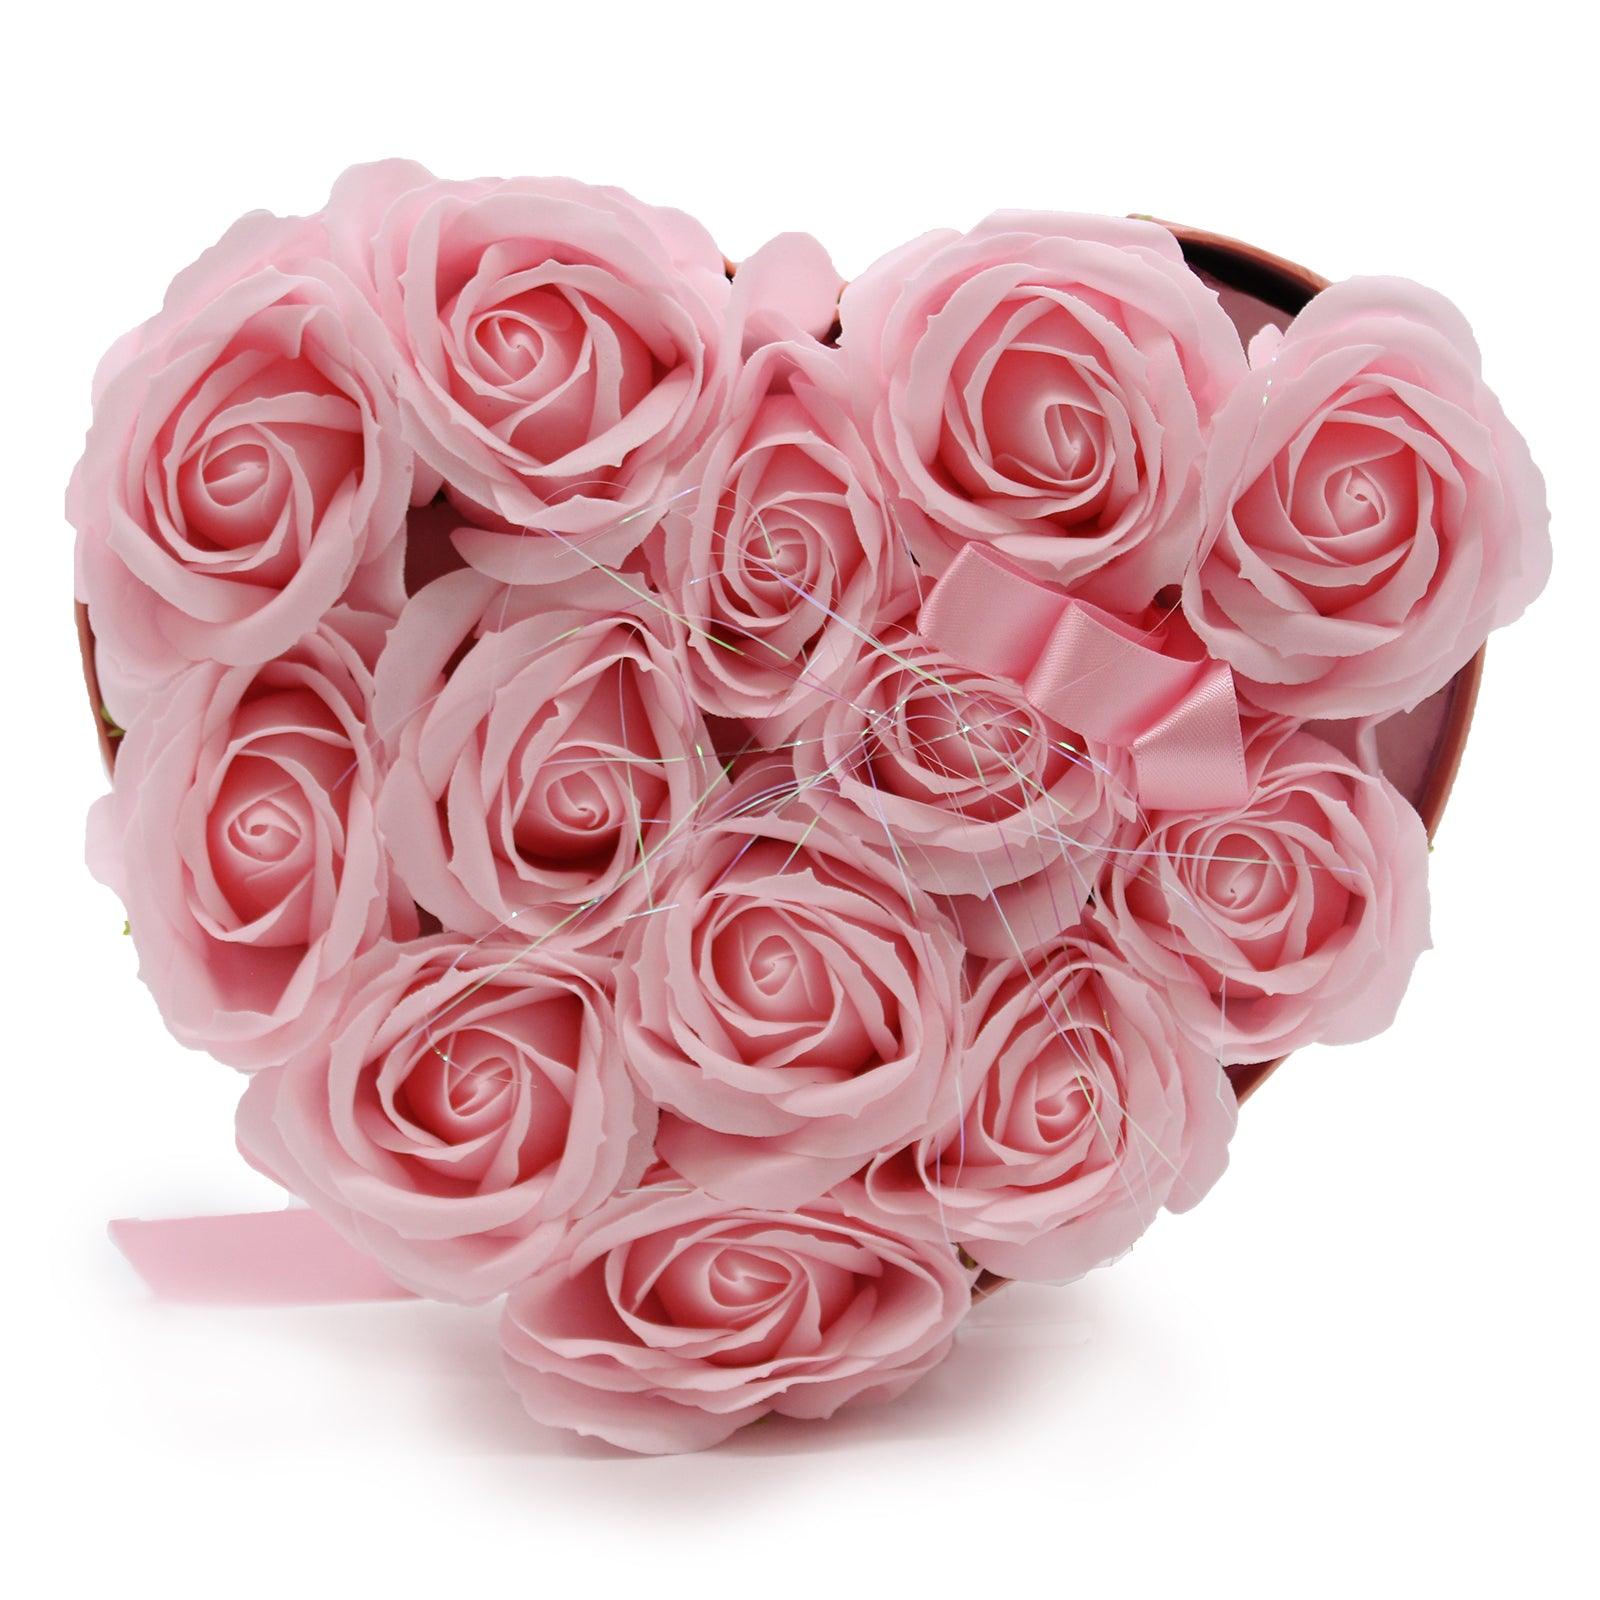 Soap Flower Bouquet - 13 Pink Roses - Heart - Charming Spaces